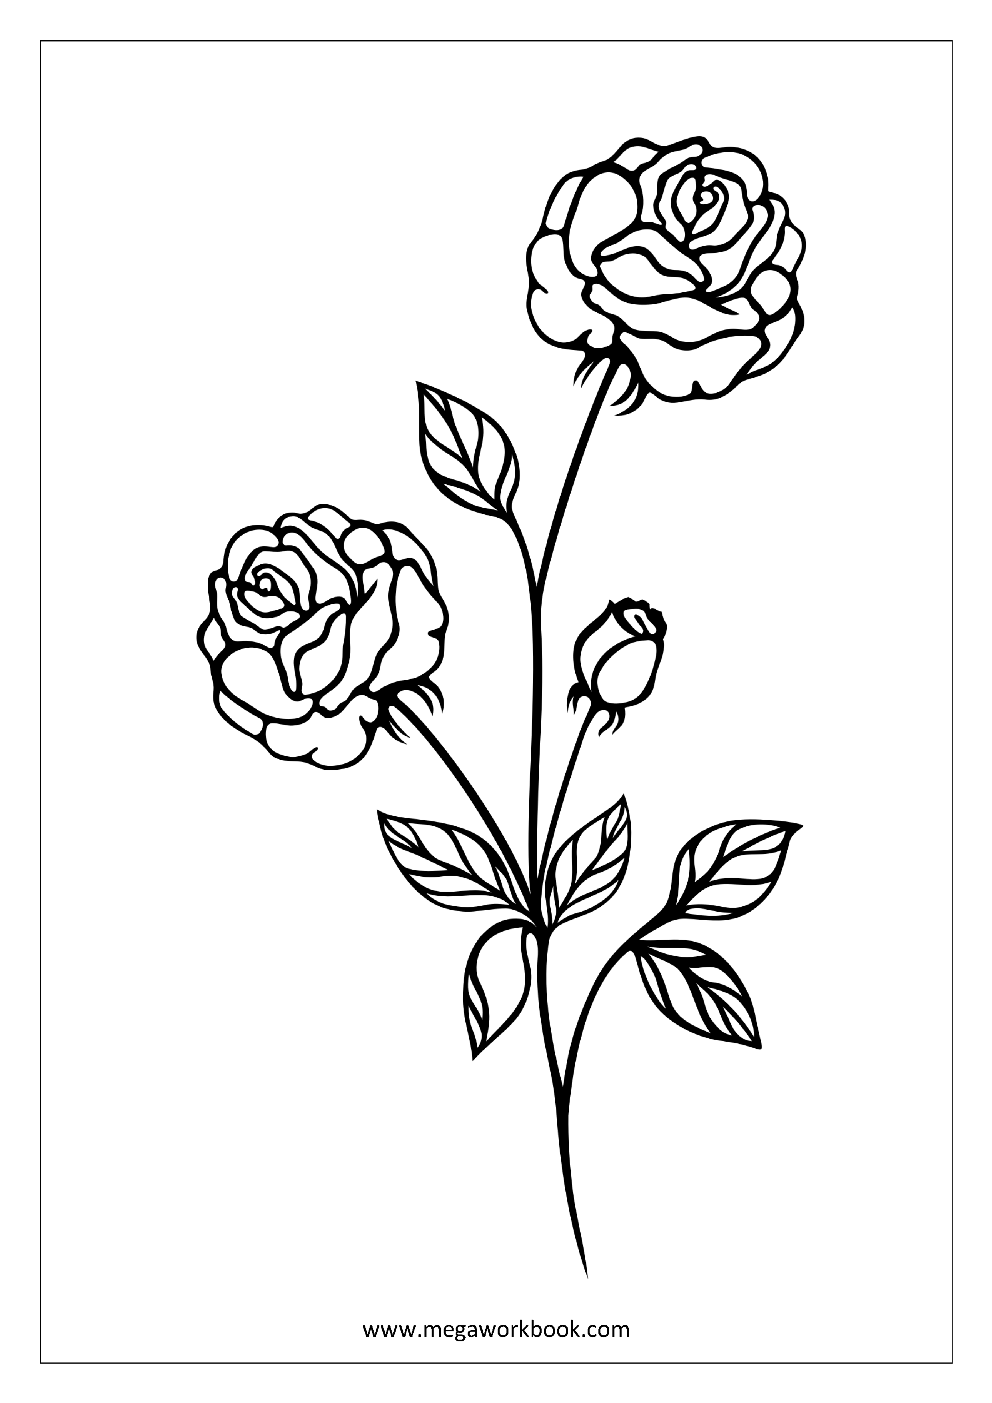 Flower Coloring Pages Plant Tree Coloring Pages Leaf Coloring